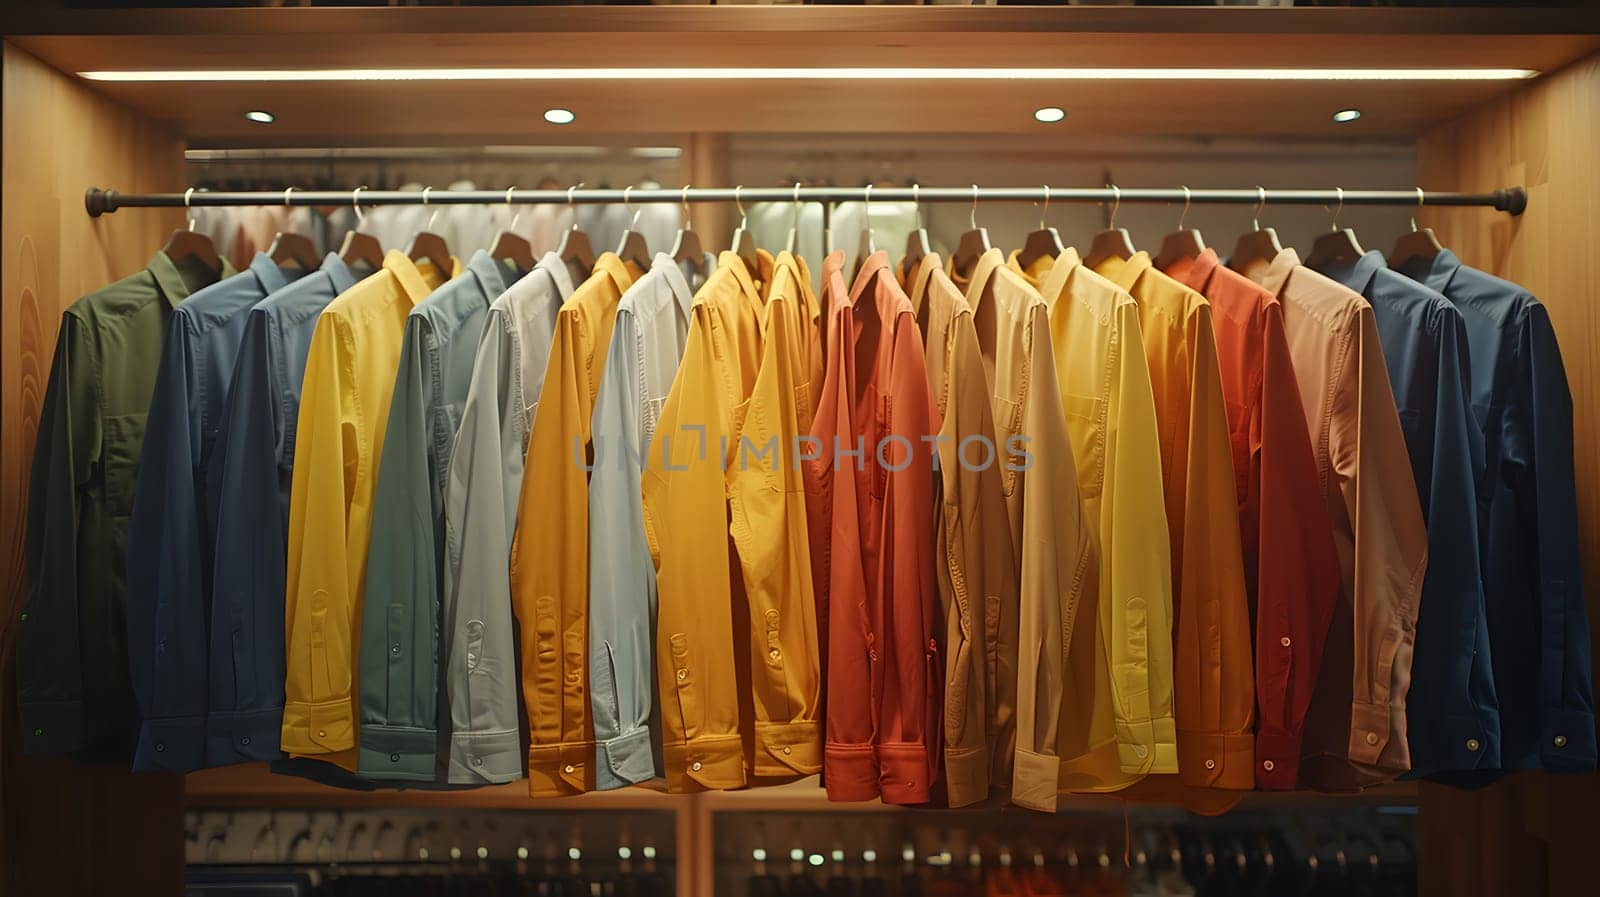 A vibrant closet full of colorful shirts on a clothes hanger fixture by Nadtochiy